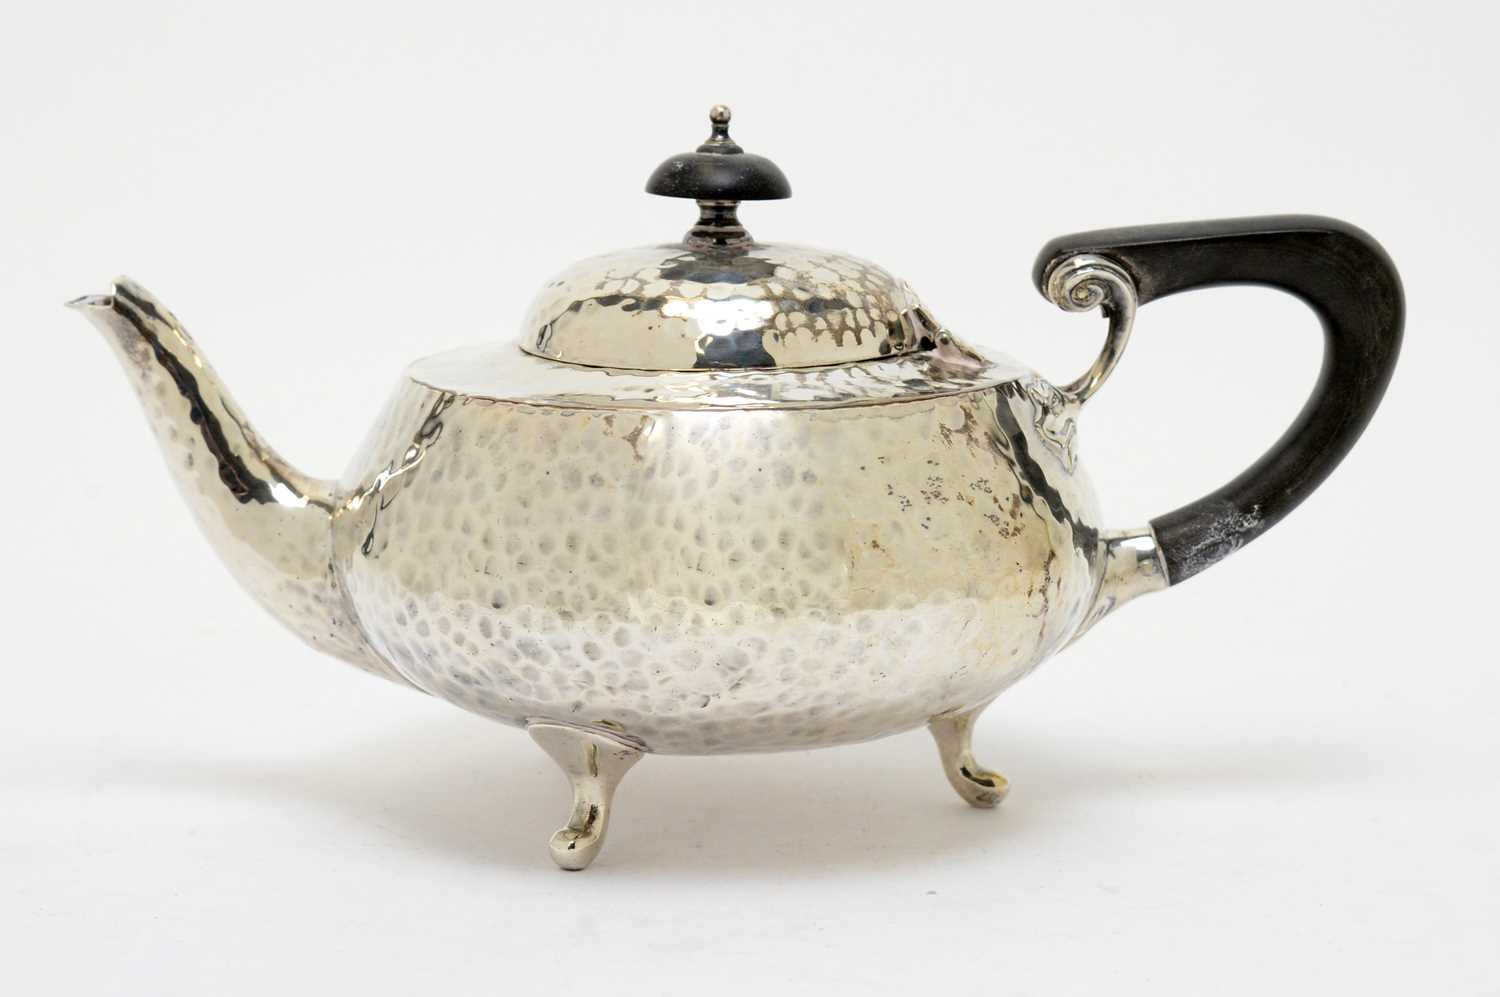 Lot 149 - An Arts & Crafts silver teapot, by Charles Edwards